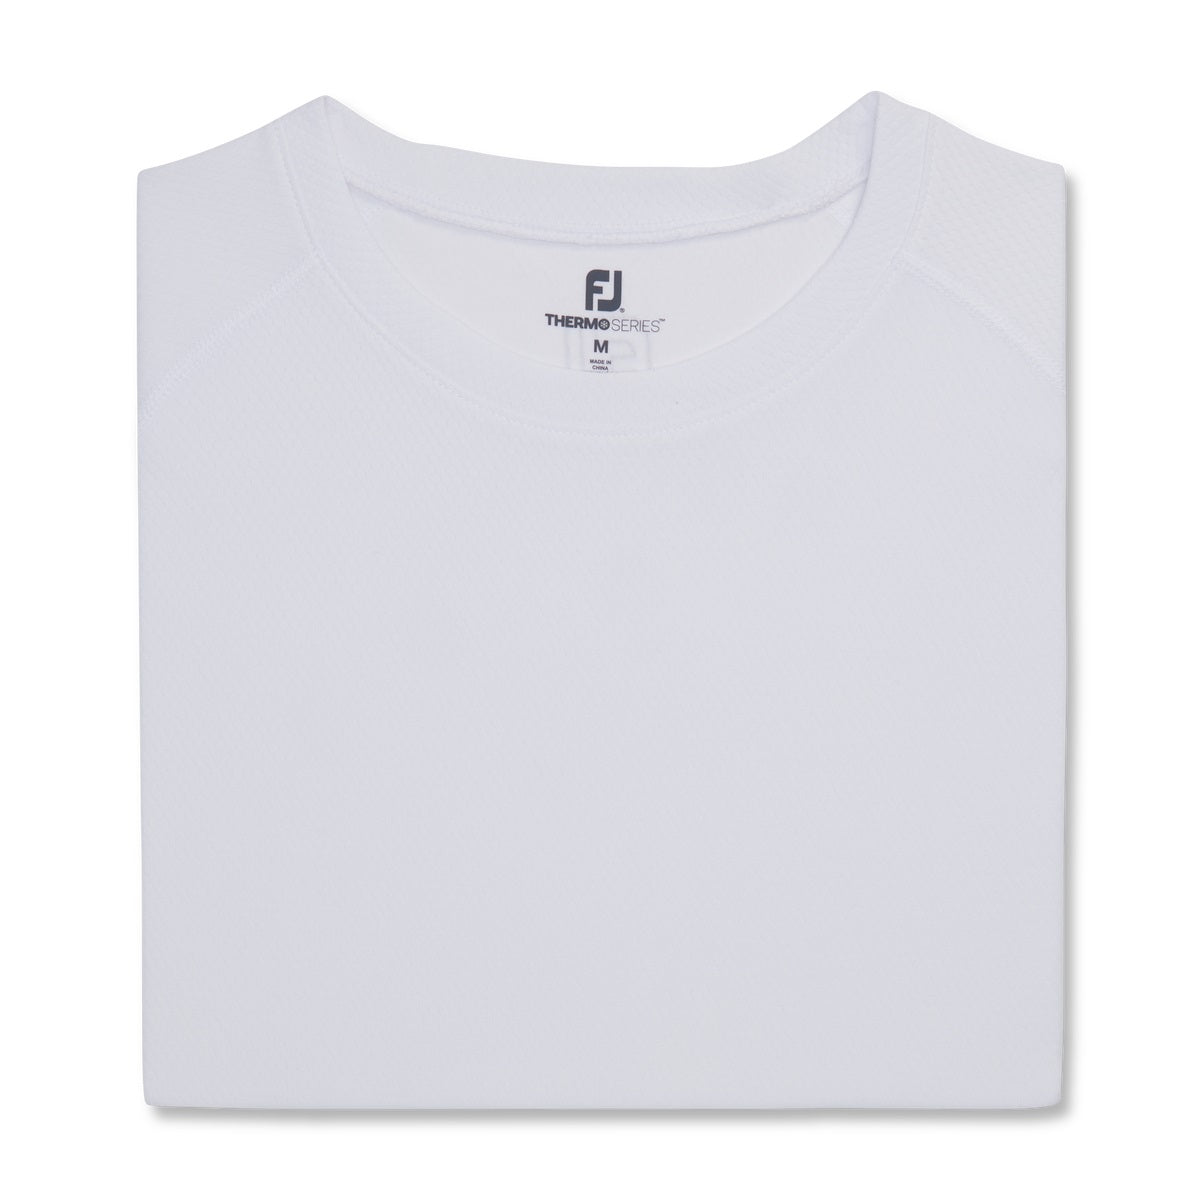 Footjoy ThermoSeries Base Layer